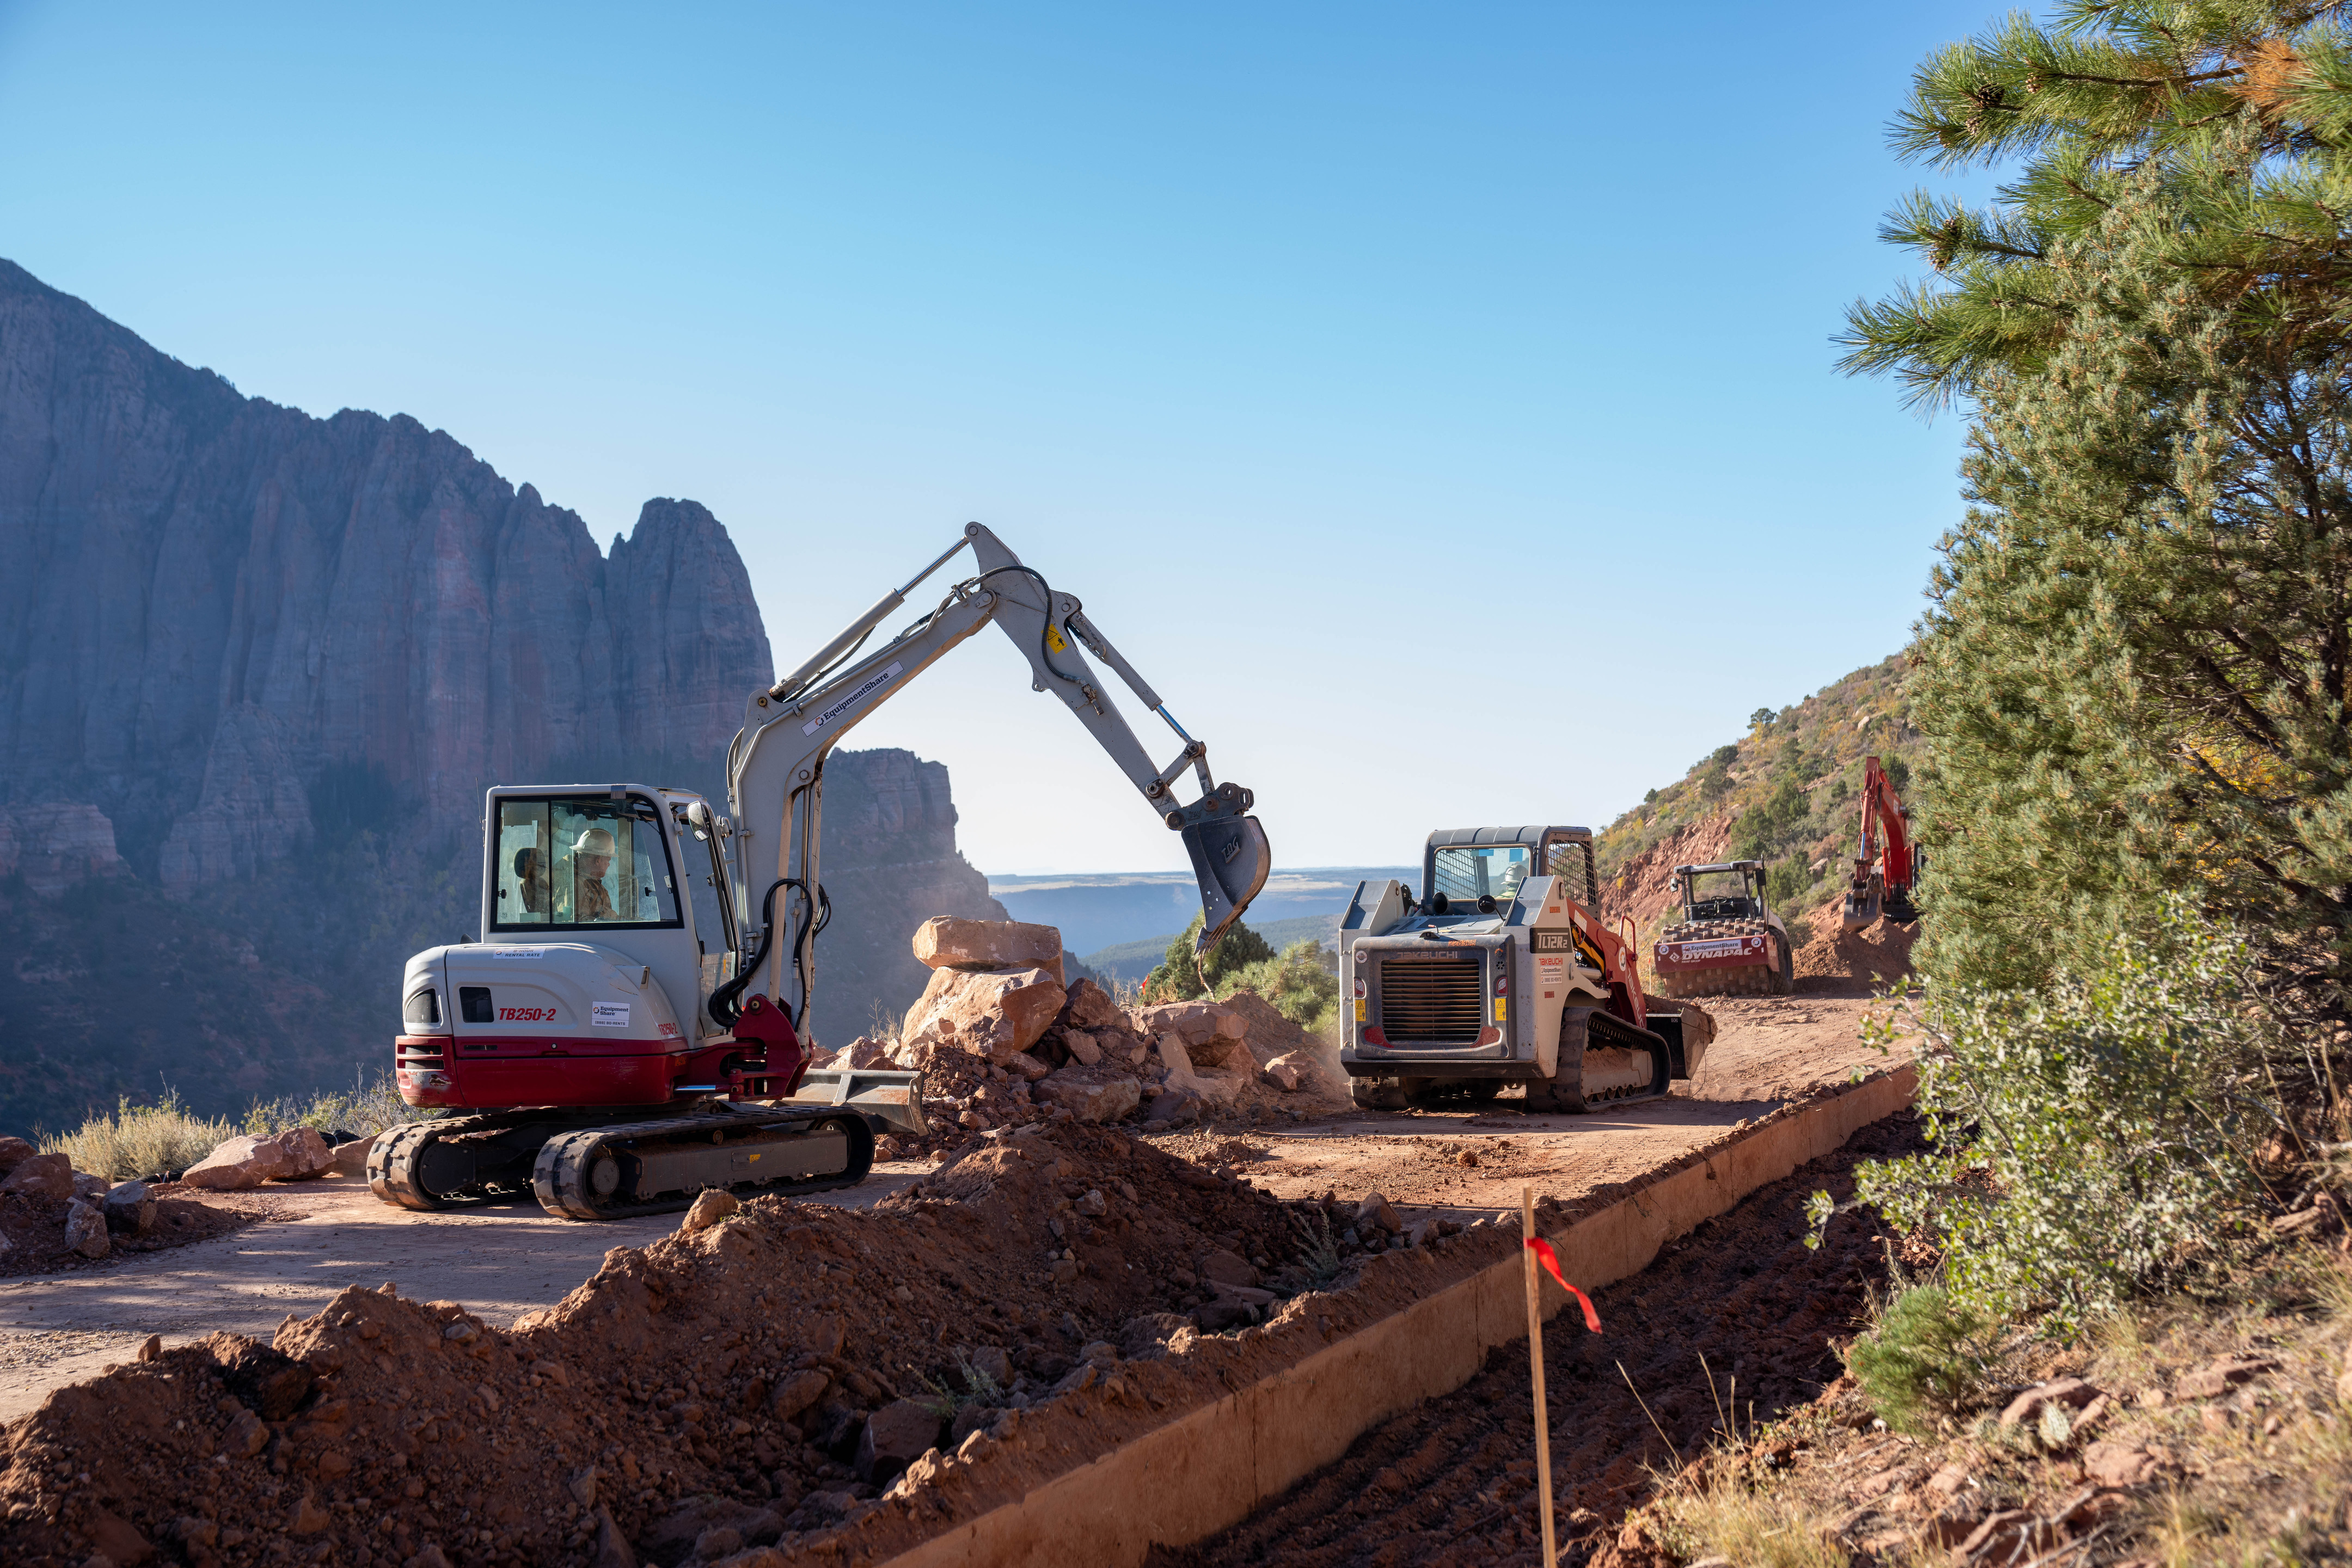 Excavating and other construction machinery sits on a partially graded dirt road-bed with concrete formwork in front of them and towering red rock and a clear sky behind.